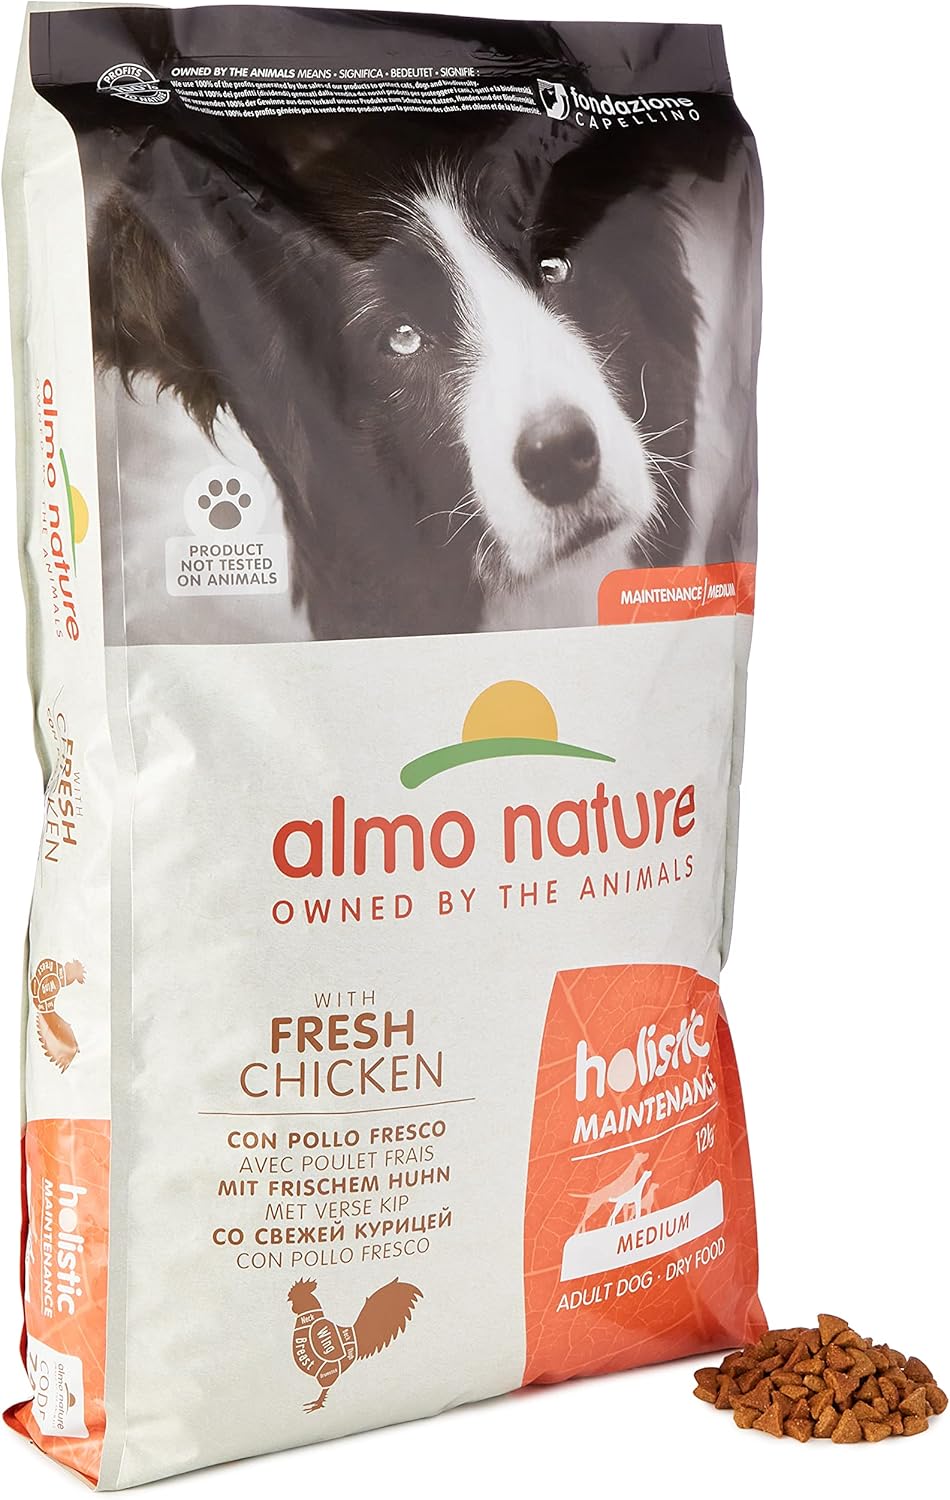 Almo Nature Holistic Dog Medium with Chicken and Rice 12 Kg, transparent?744